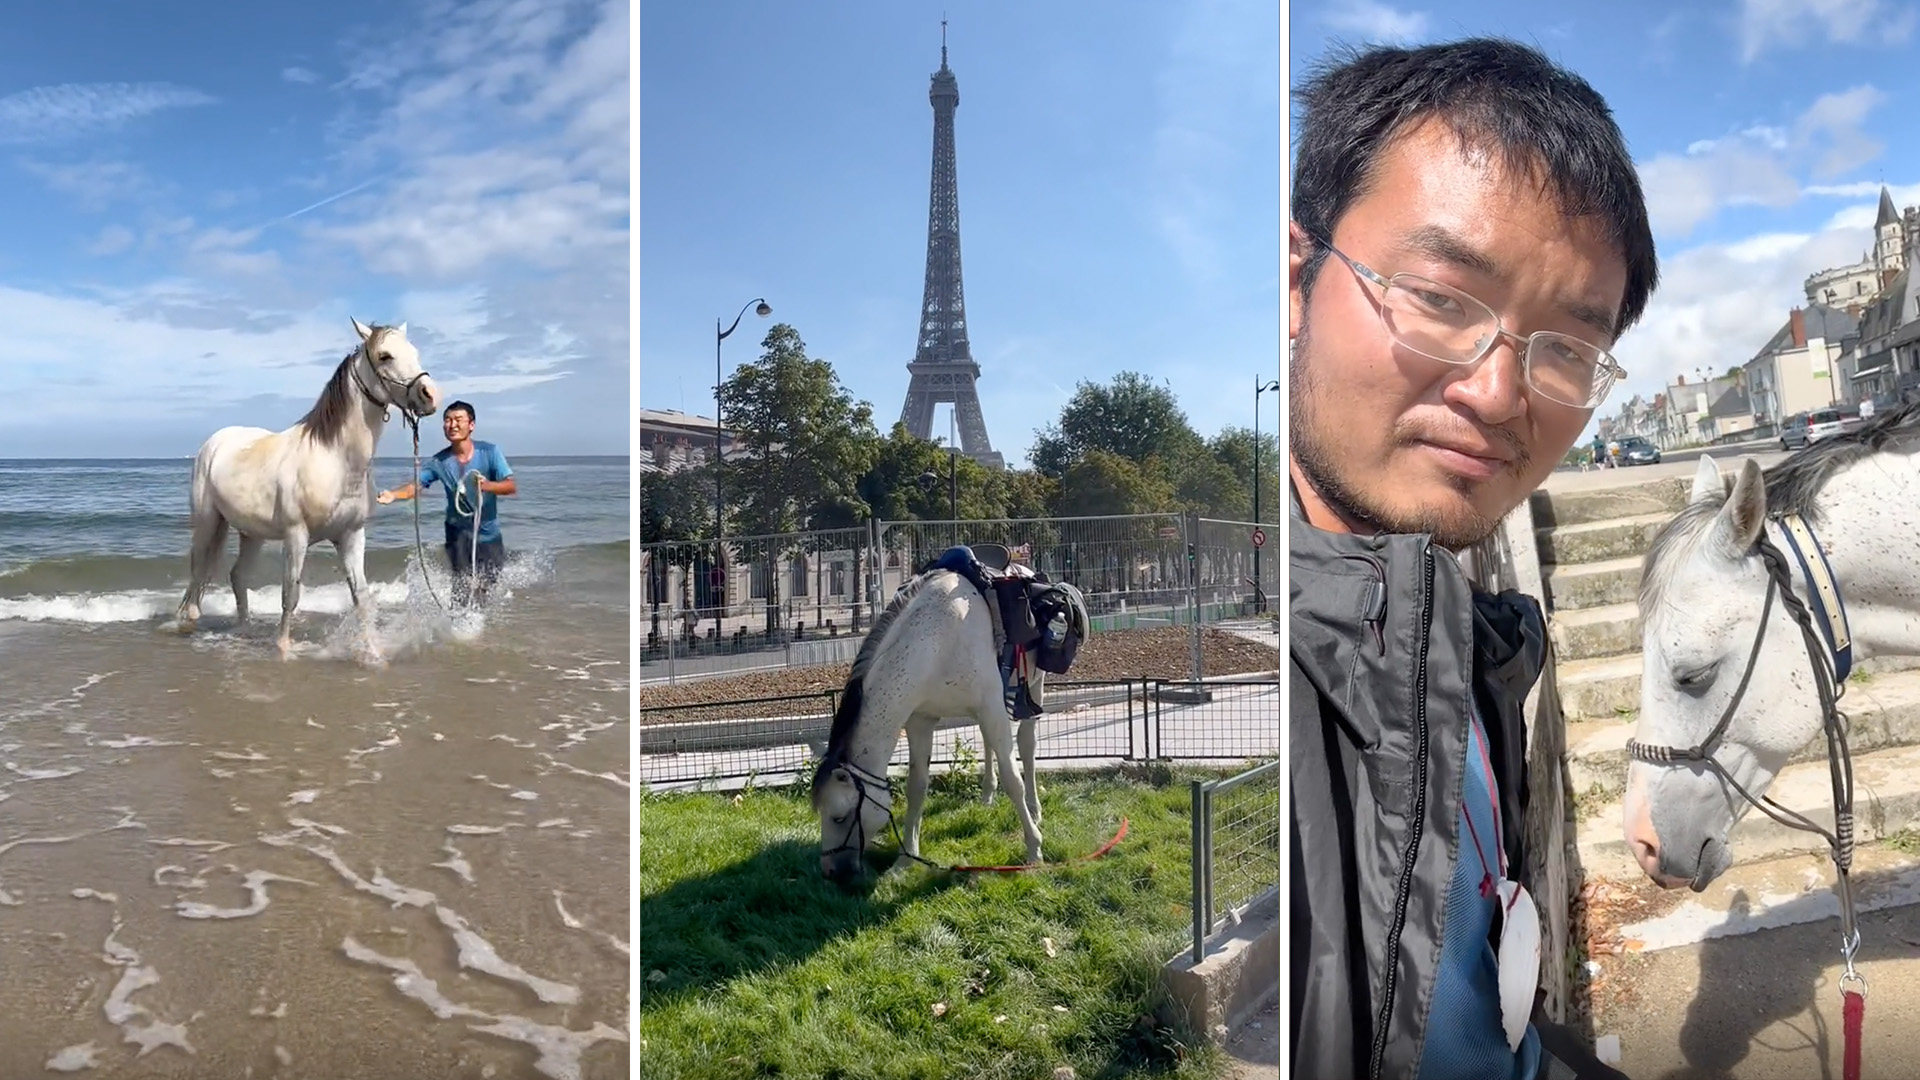 A Chinese man travelling from Europe to China on horseback has won fans with his quirky online video diary about the adventures he and his ‘naughty’ horse are having. Photo: SCMP composite